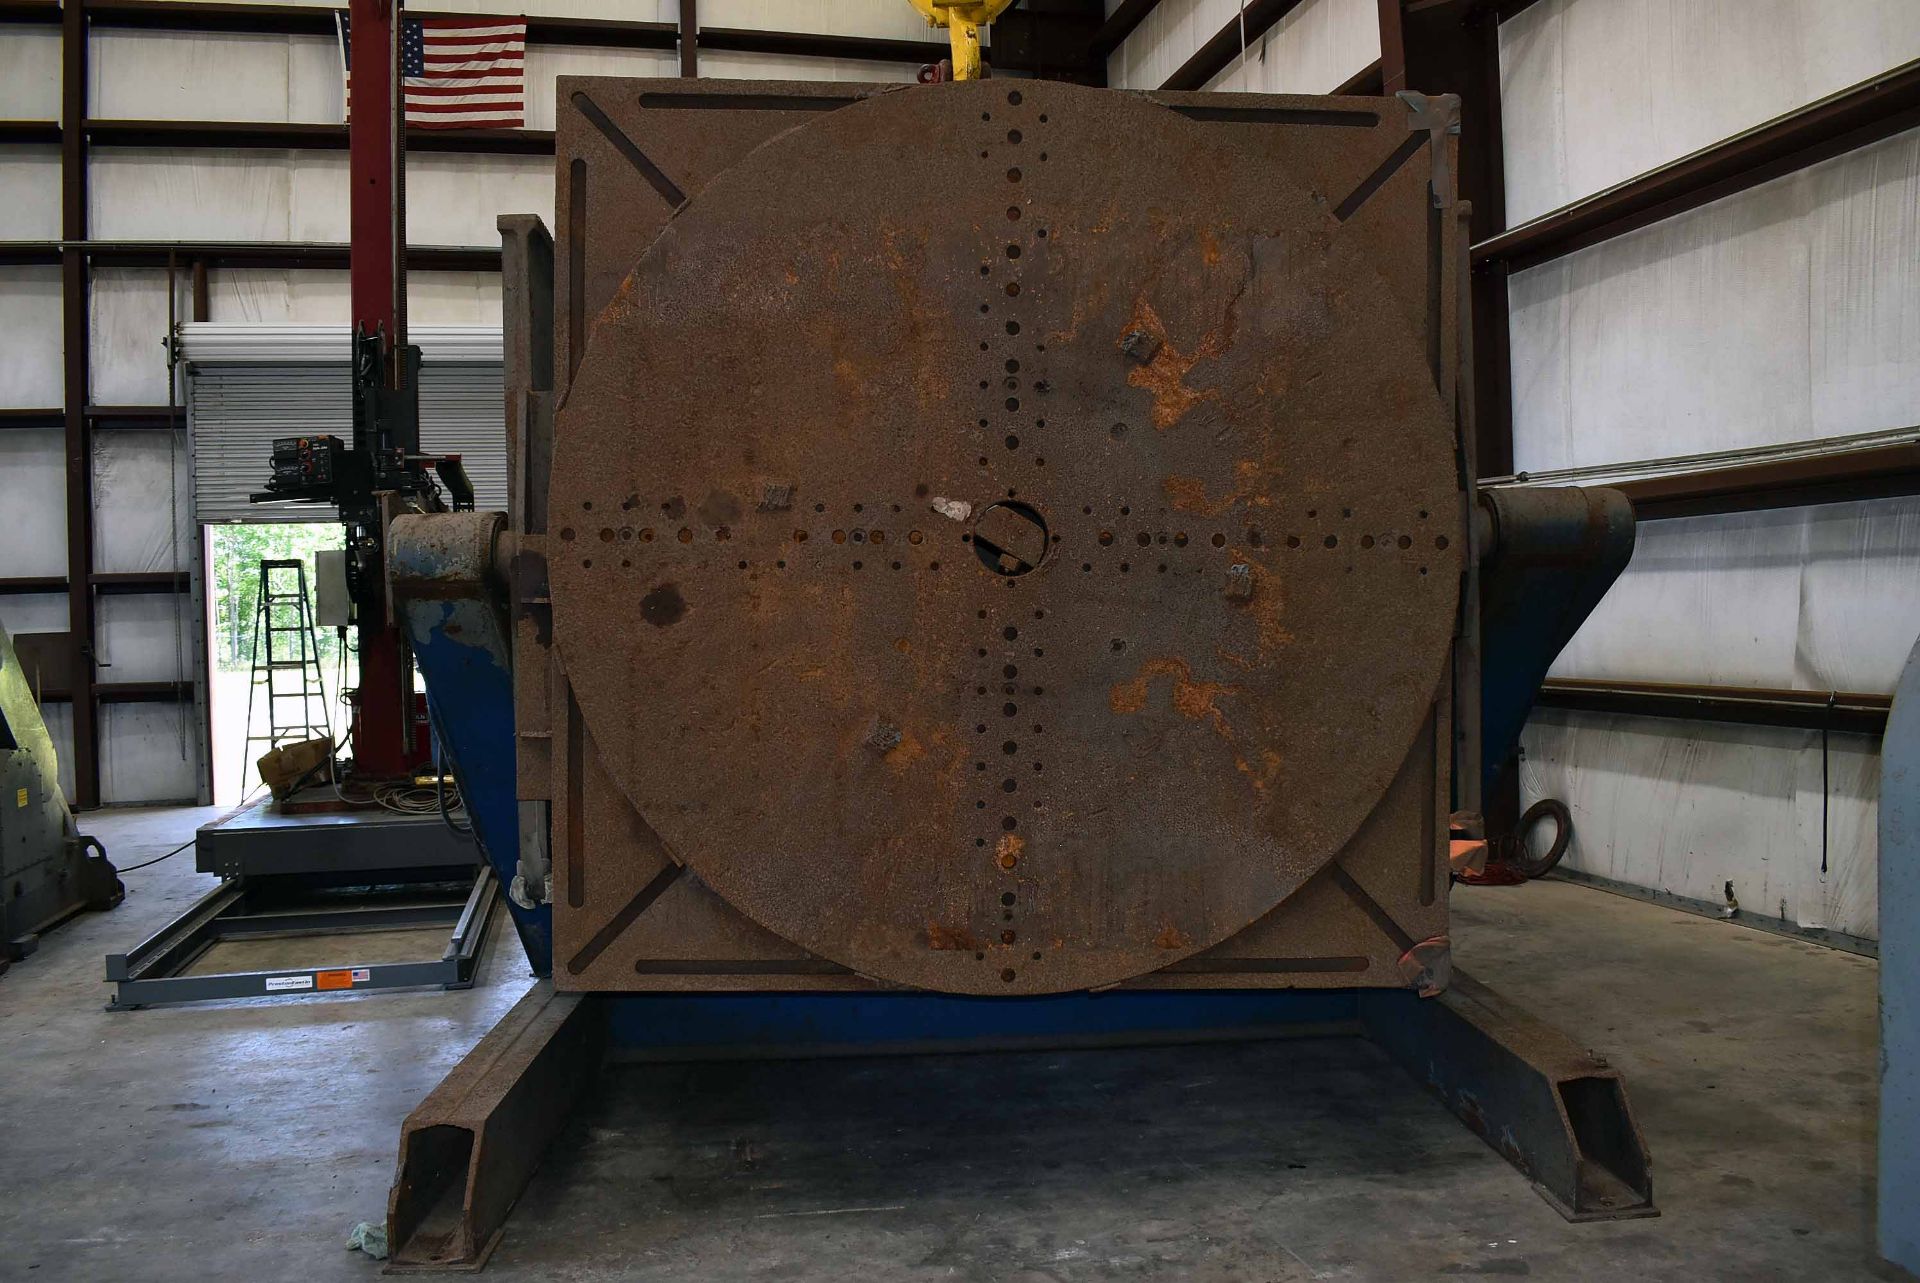 LARGE CAPACITY WELDING POSITIONER, KOIKE ARONSON 95,000 LB. CAP., Mdl. AB-950-96, 96" X 96" square - Image 11 of 11